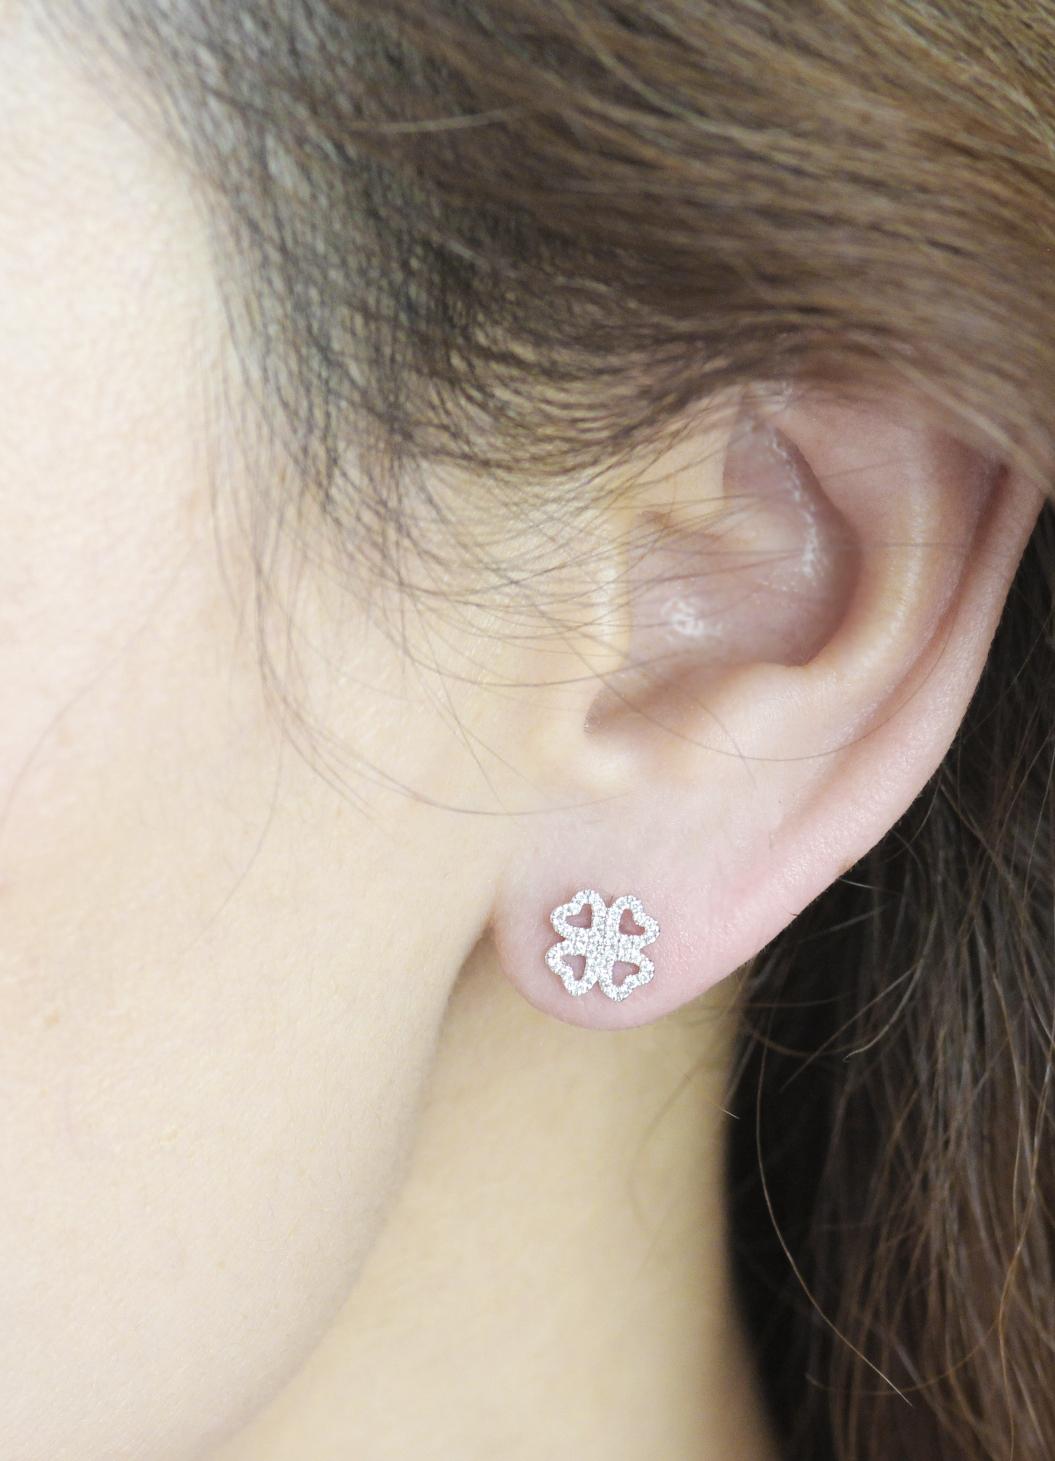 These are your lucky diamond earrings - with a delicate four-leafed clover shaped border set with tiny, sparkly round brilliant cut diamonds, these lightweight, sparkly earstuds are perfect for day to evening.  With a diamond content of a third of a